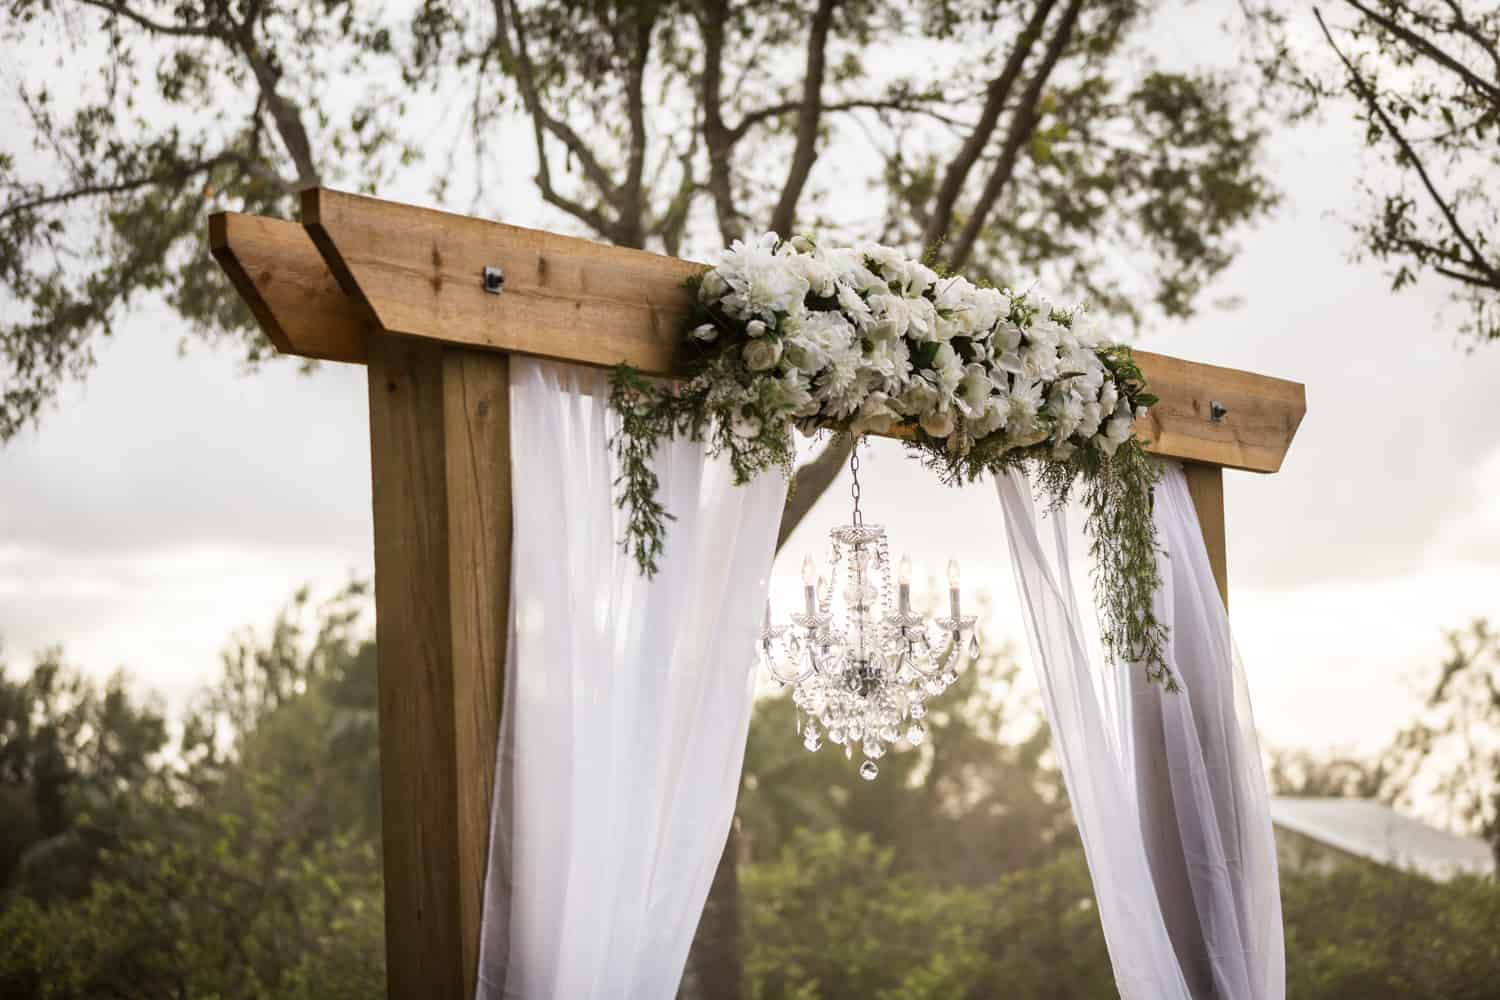 Wooden archway with white curtains, flowers, and a chandelier